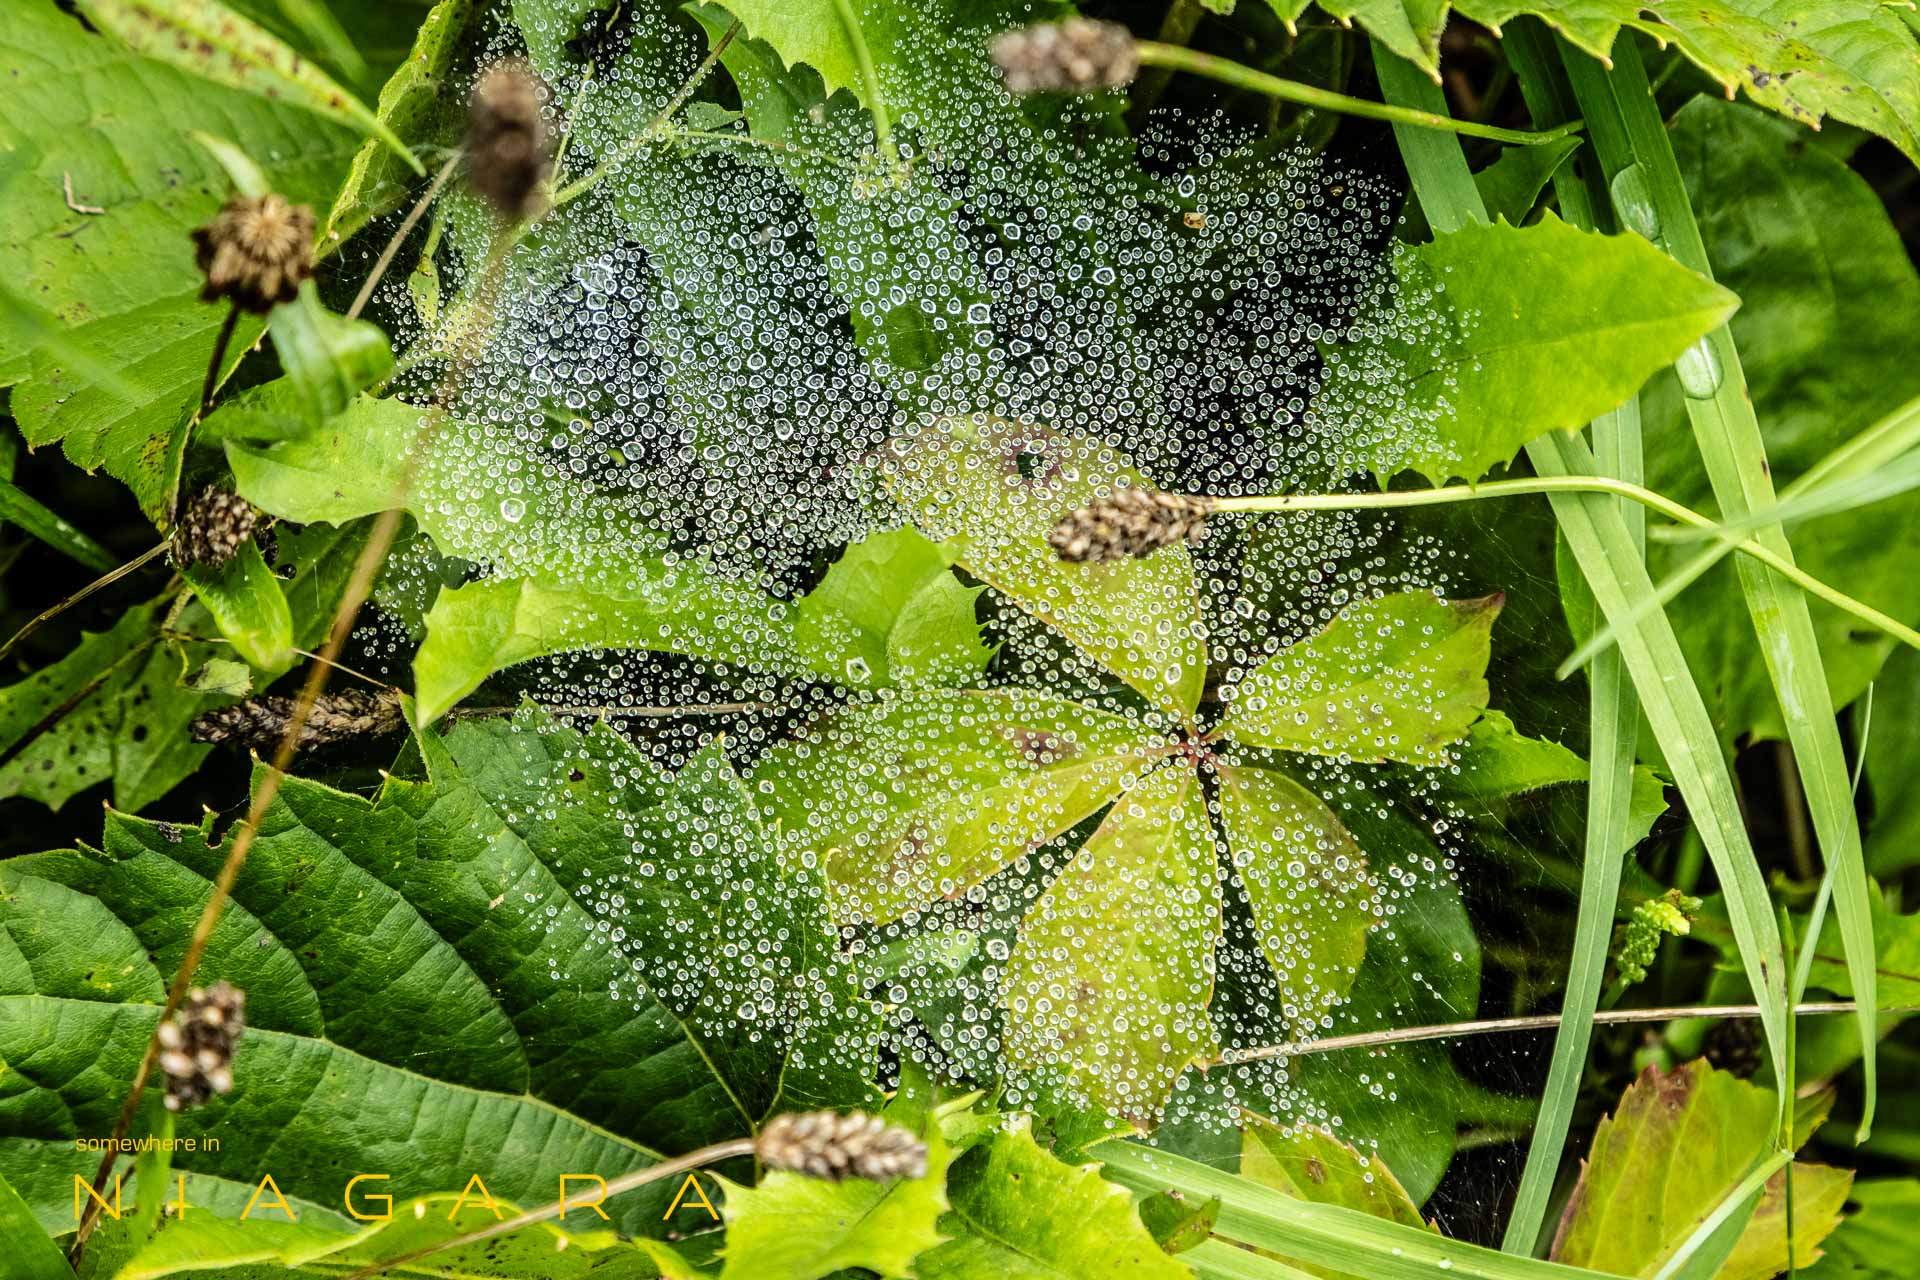 Image Of The Week: Dewdrops on a spider web